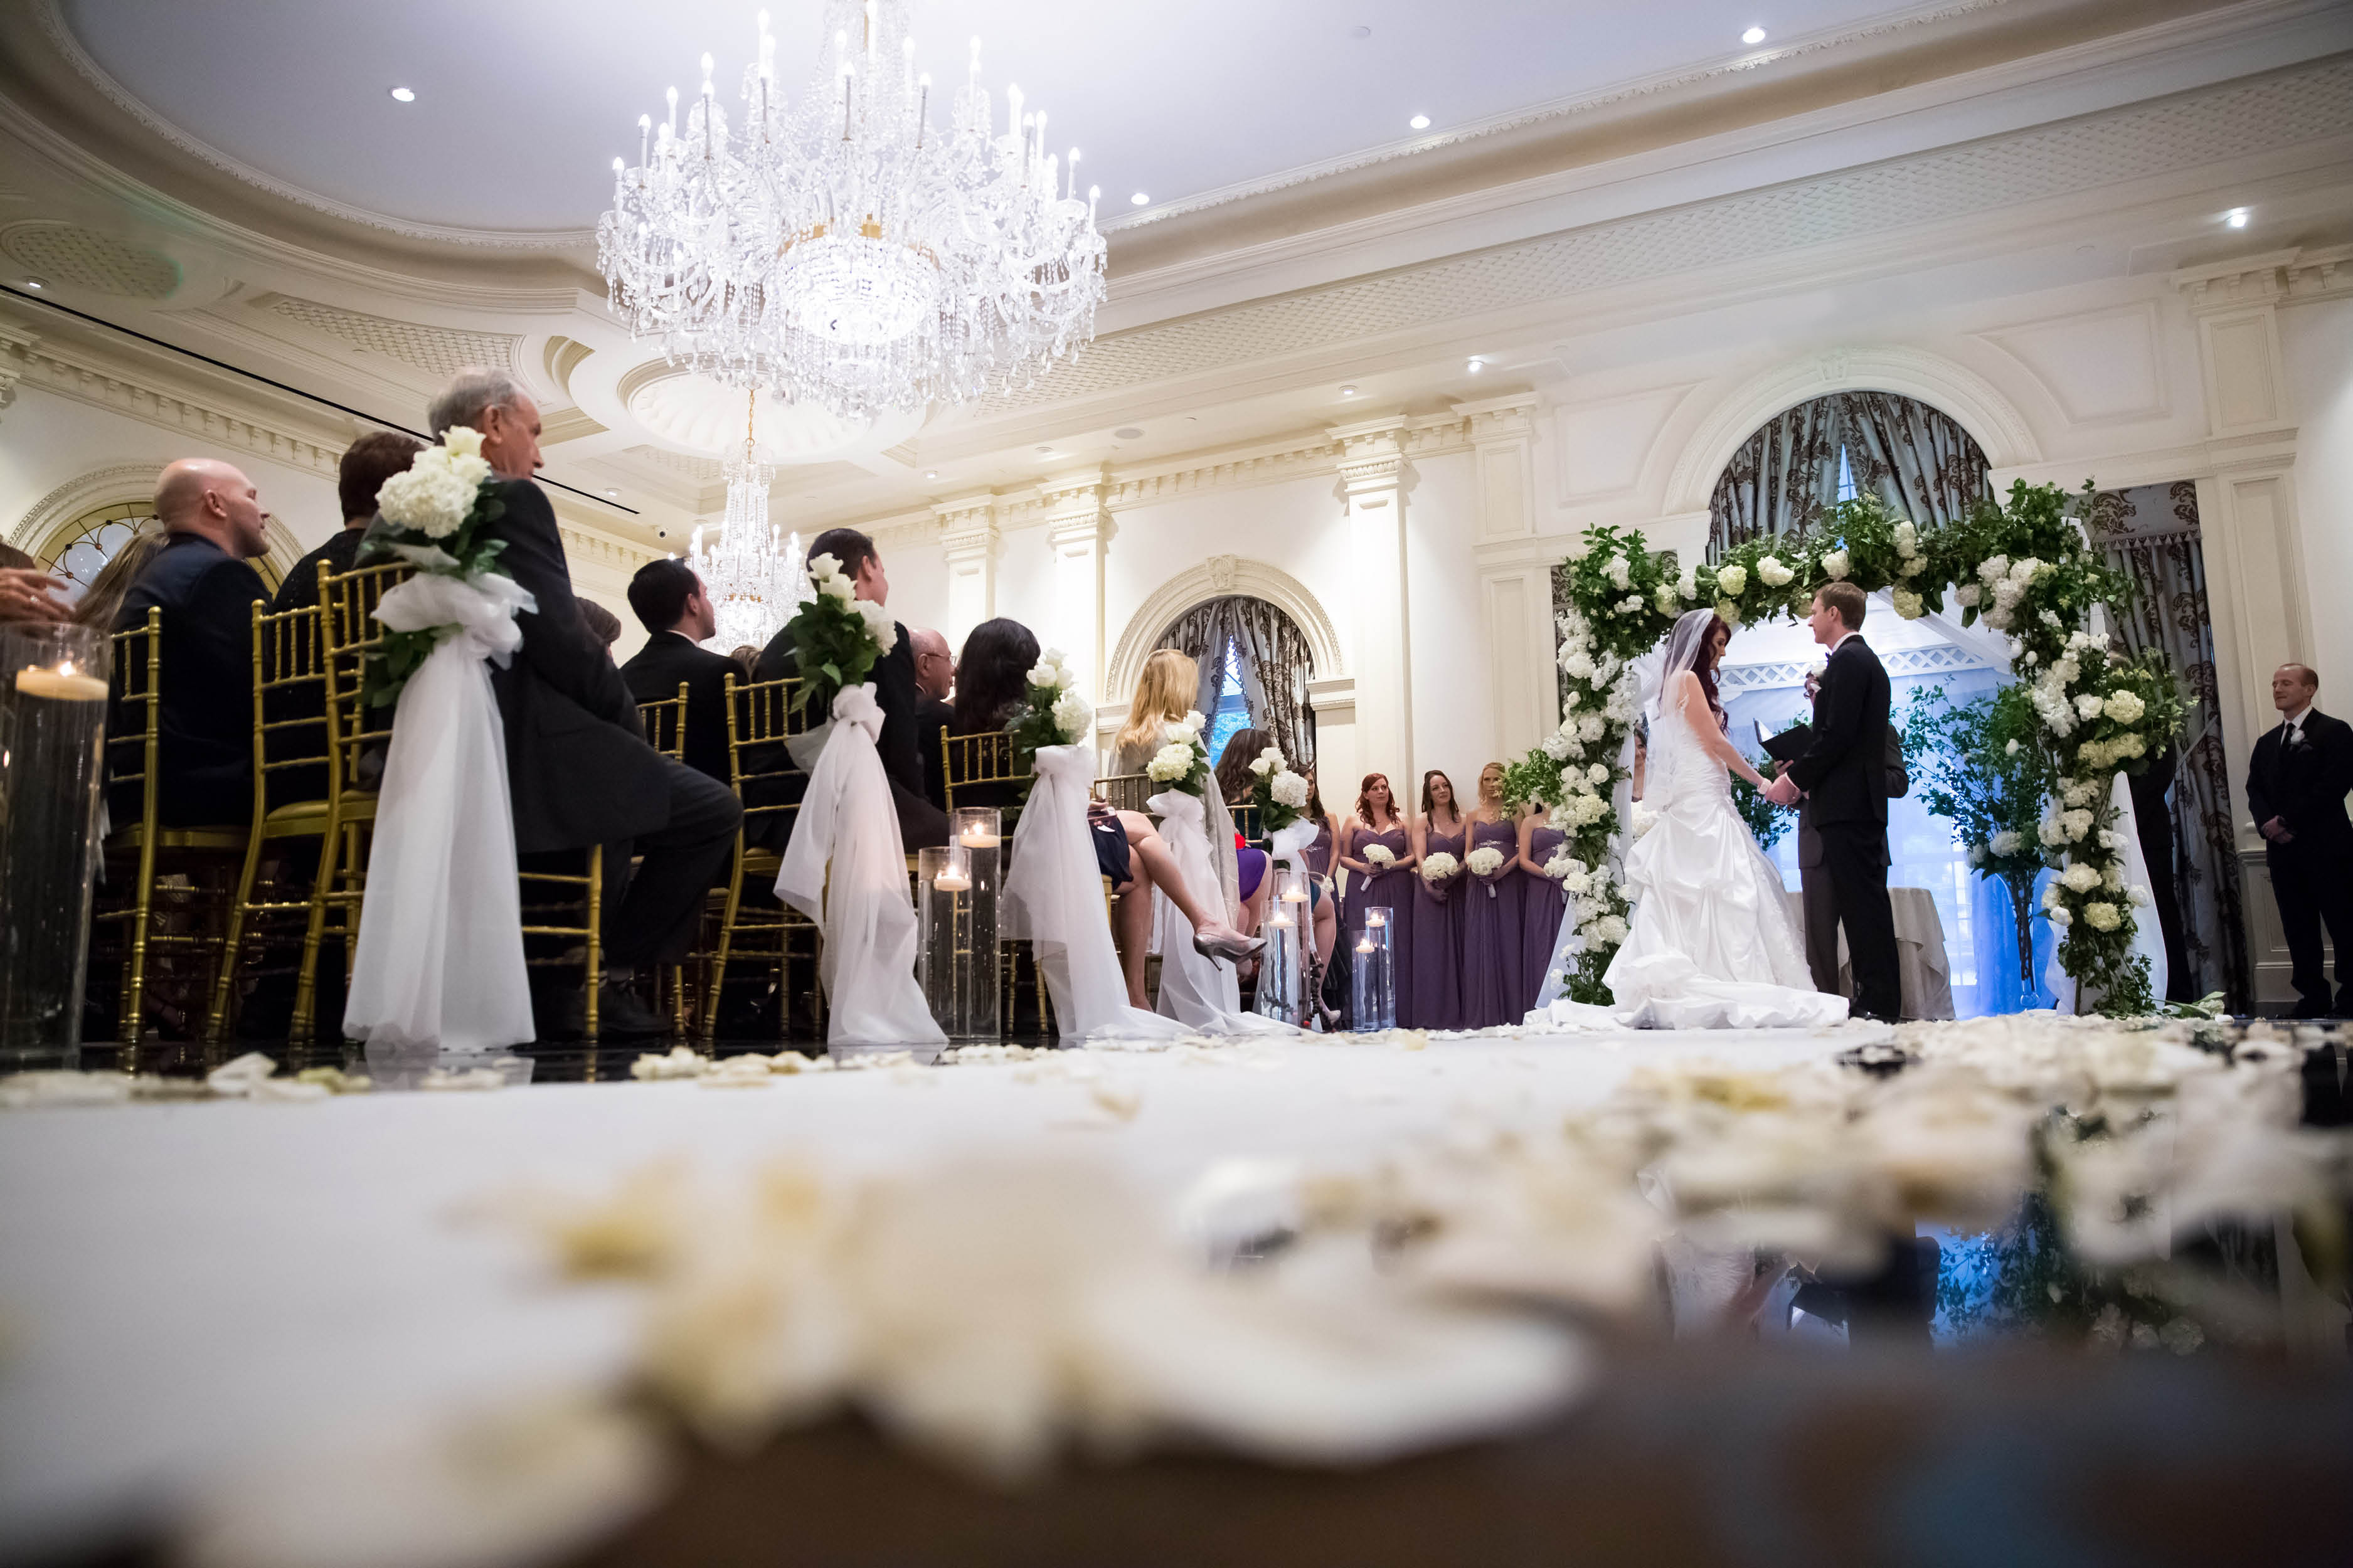 Emma_cleary_photography the Rockleigh NJ wedding14